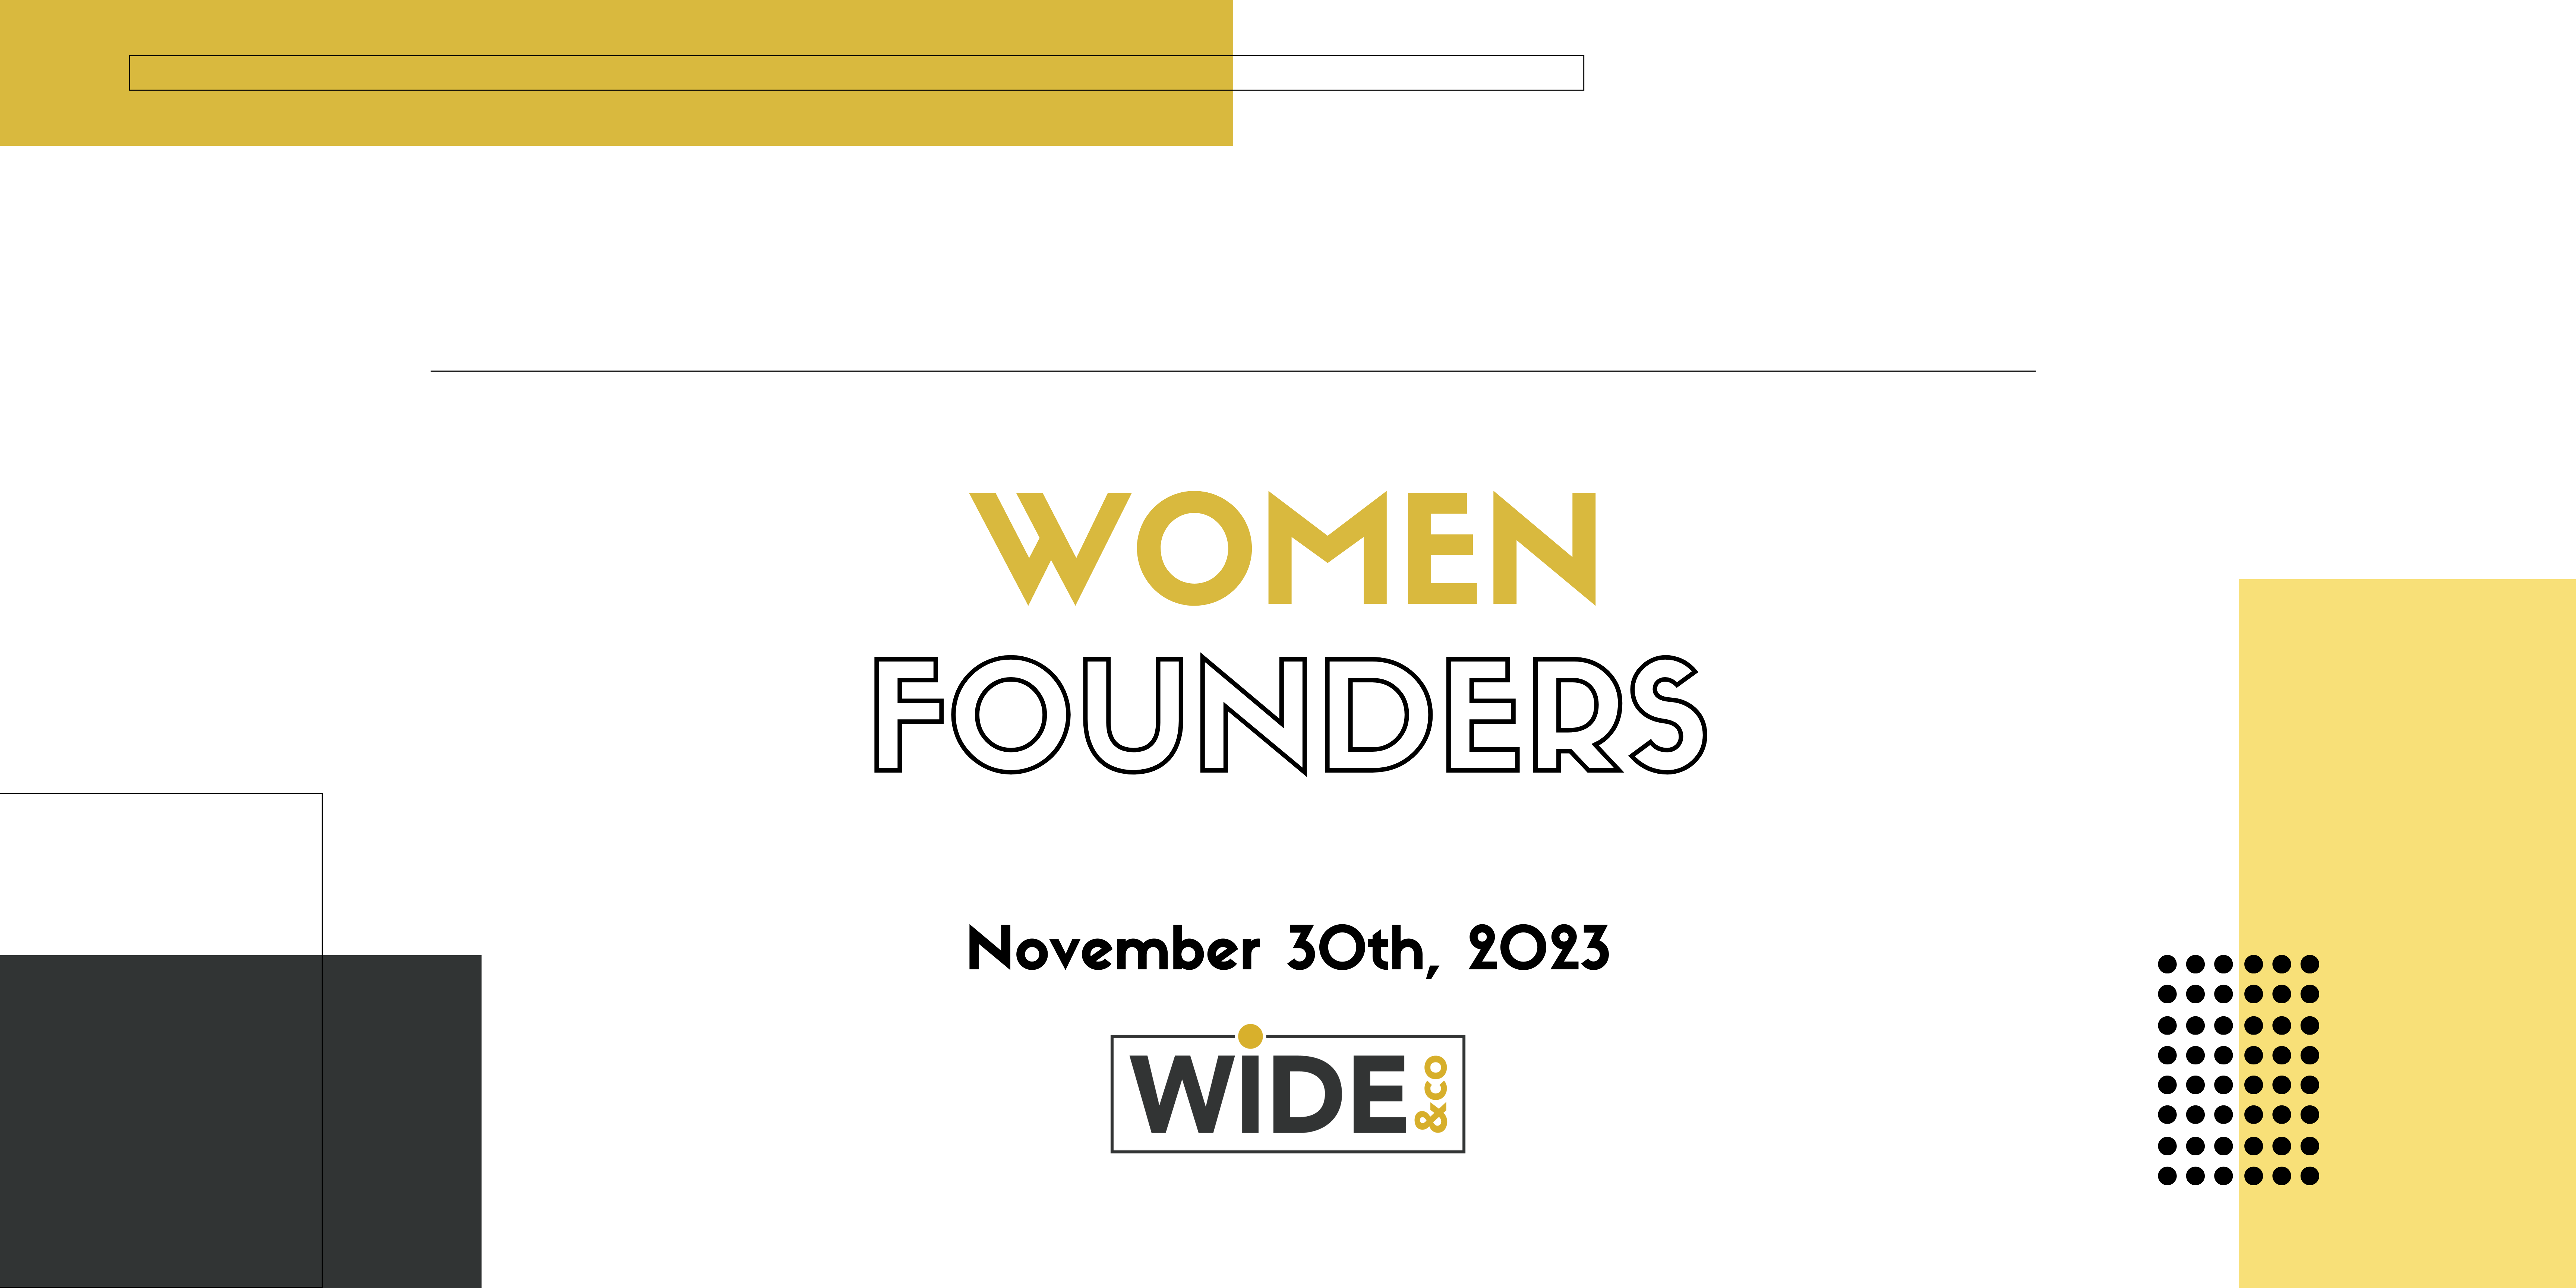 187dae50-63db-40f5-aee8-2617b8c9aa3c-event_content_documents-Women-Founders-2023-Banner-Save-your-spot(1)-1